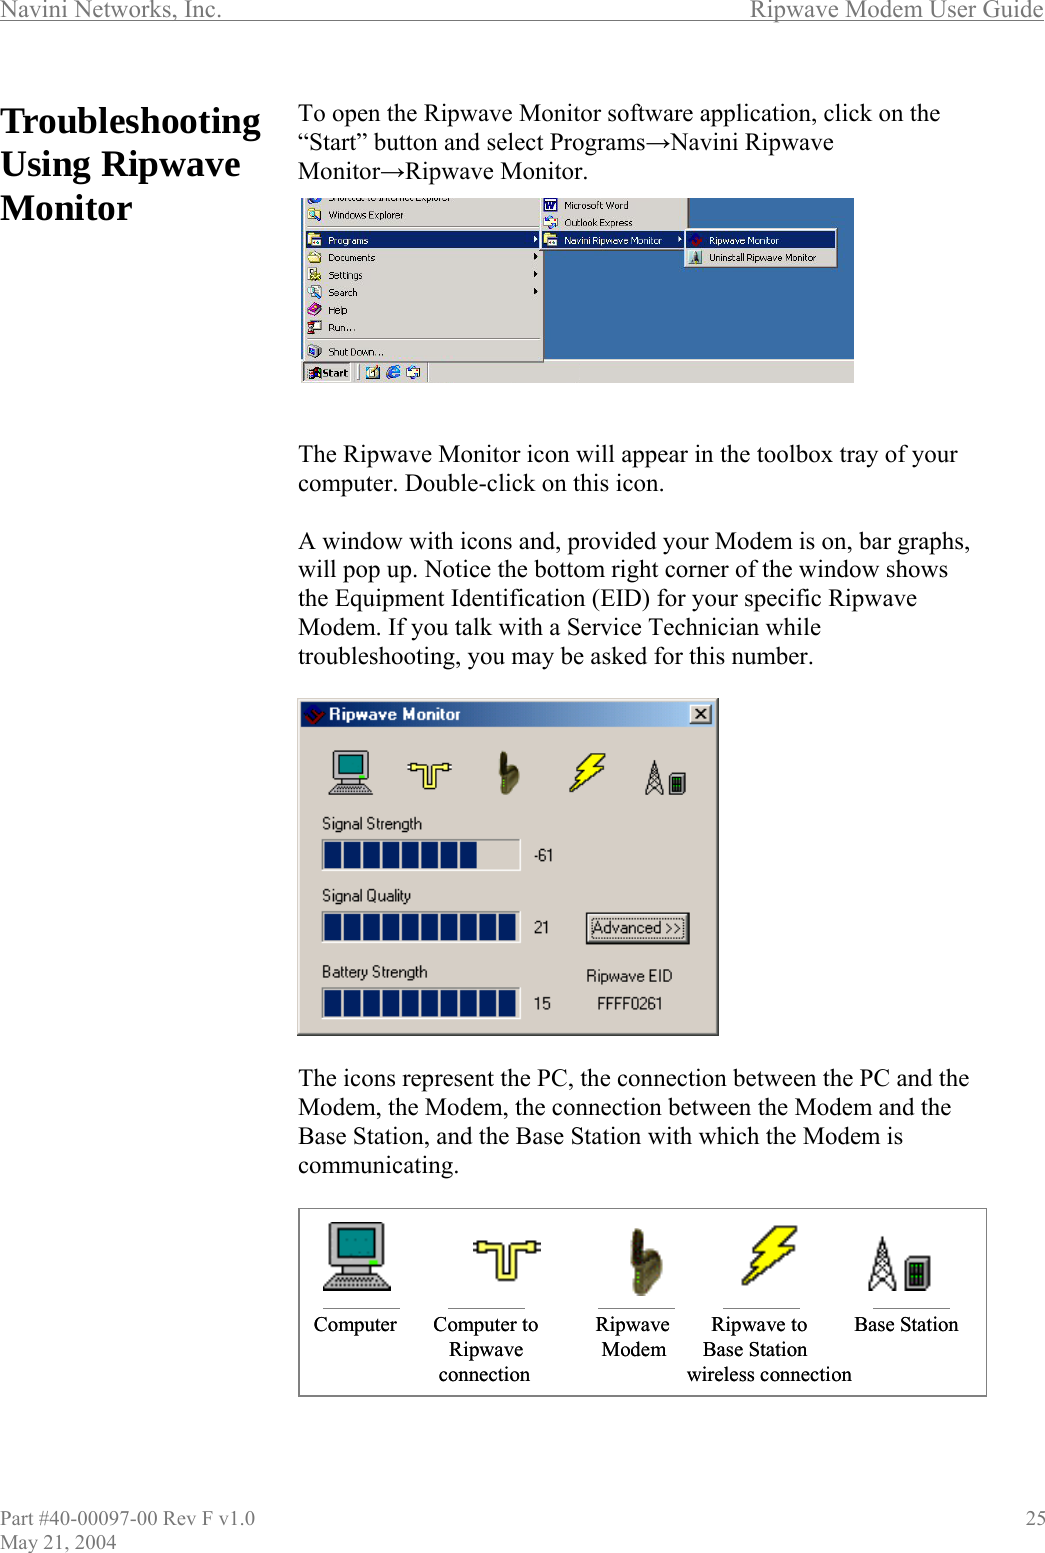 Navini Networks, Inc.        Ripwave Modem User Guide TroubleshootingUsing Ripwave Monitor                                           o open the Ripwave Monitor software application, click on the Start” button and select Programs→Navini Ripwave onitor→Ripwave Monitor.    appear in the toolbox tray of your omputer. Double-click on this icon.   rner of the window shows e Equipment Identification (EID) for your specific Ripwave  e PC and the dem and the ase Station, and the Base Station with which the Modem is ommunicating.  T“M  The Ripwave Monitor icon willc A window with icons and, provided your Modem is on, bar graphs,will pop up. Notice the bottom right cothModem. If you talk with a Service Technician while troubleshooting, you may be asked for this number.  The icons represent the PC, the connection between thModem, the Modem, the connection between the MoBc  Computer       Computer to           Ripwave        Ripwave to   Base StationRipwave               Modem       Base Stationconnection                              wireless connection Computer       Computer to           Ripwave        Ripwave to   Base StationRipwave               Modem       Base Stationconnection                              wireless connection Part #40-00097-00 Rev F v1.0                                          25 May 21, 2004 